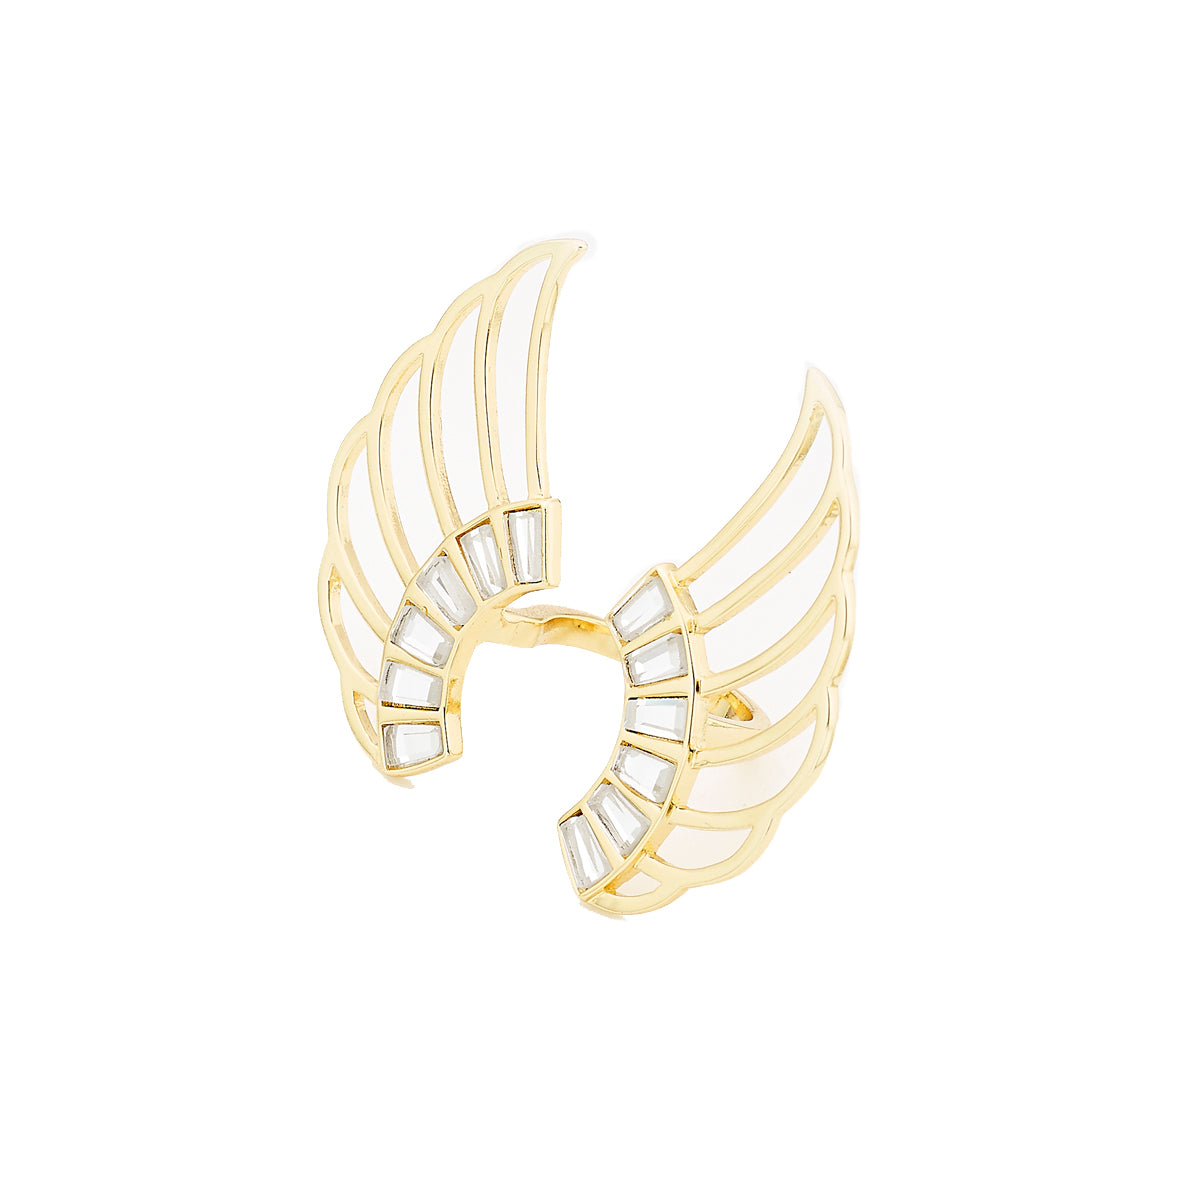 This ring is handcrafted with mirror and gold plated brass.